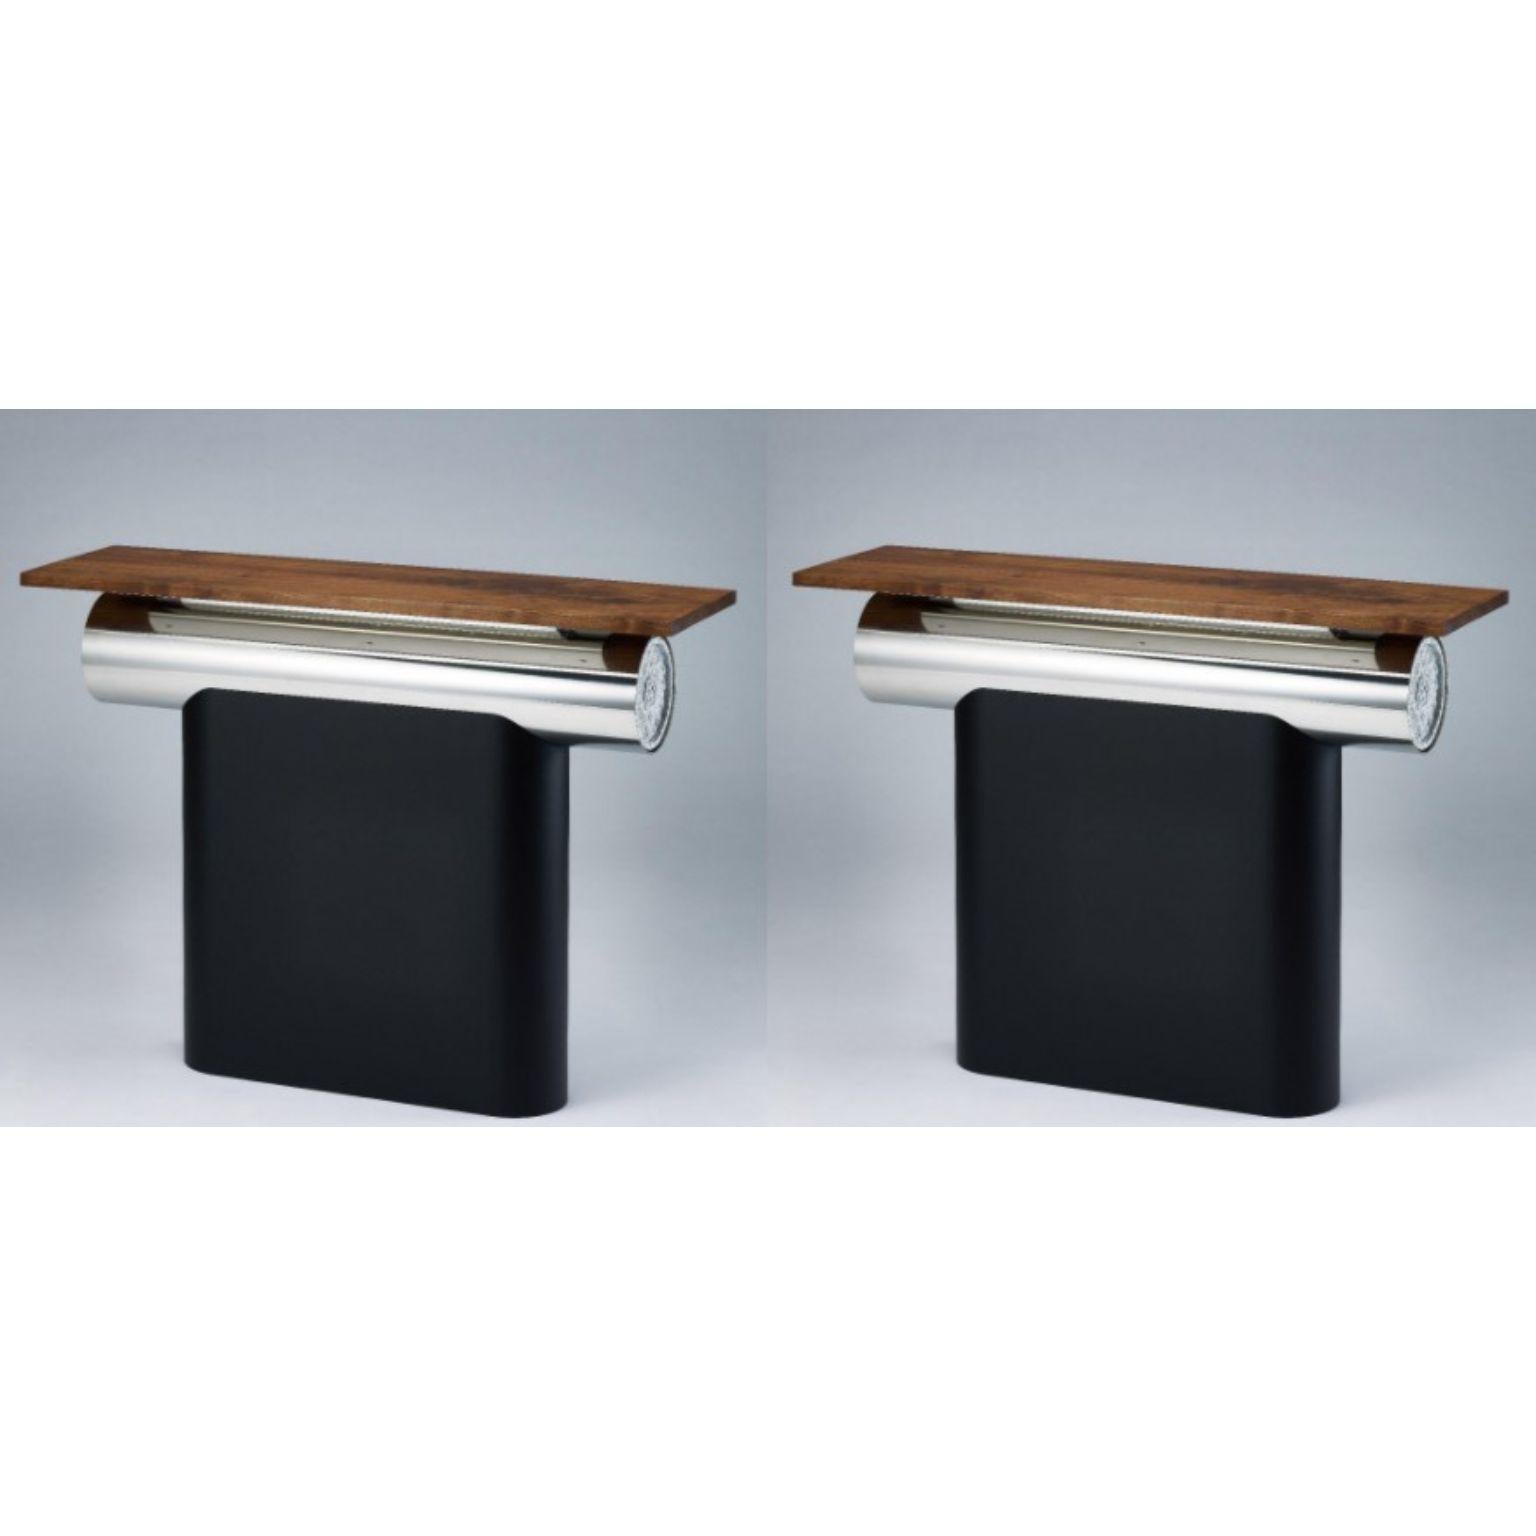 Set of 2 Heritage Gwol Console Tables by Lee Jung Hoon
Dimensions: D98 x W28 x H76 cm 
Materials: Walnut, Granite, Stainless steel, Steel.

The Heritage series, created by designer Lee Jung-hoon is a collection of sculptural modern furniture.